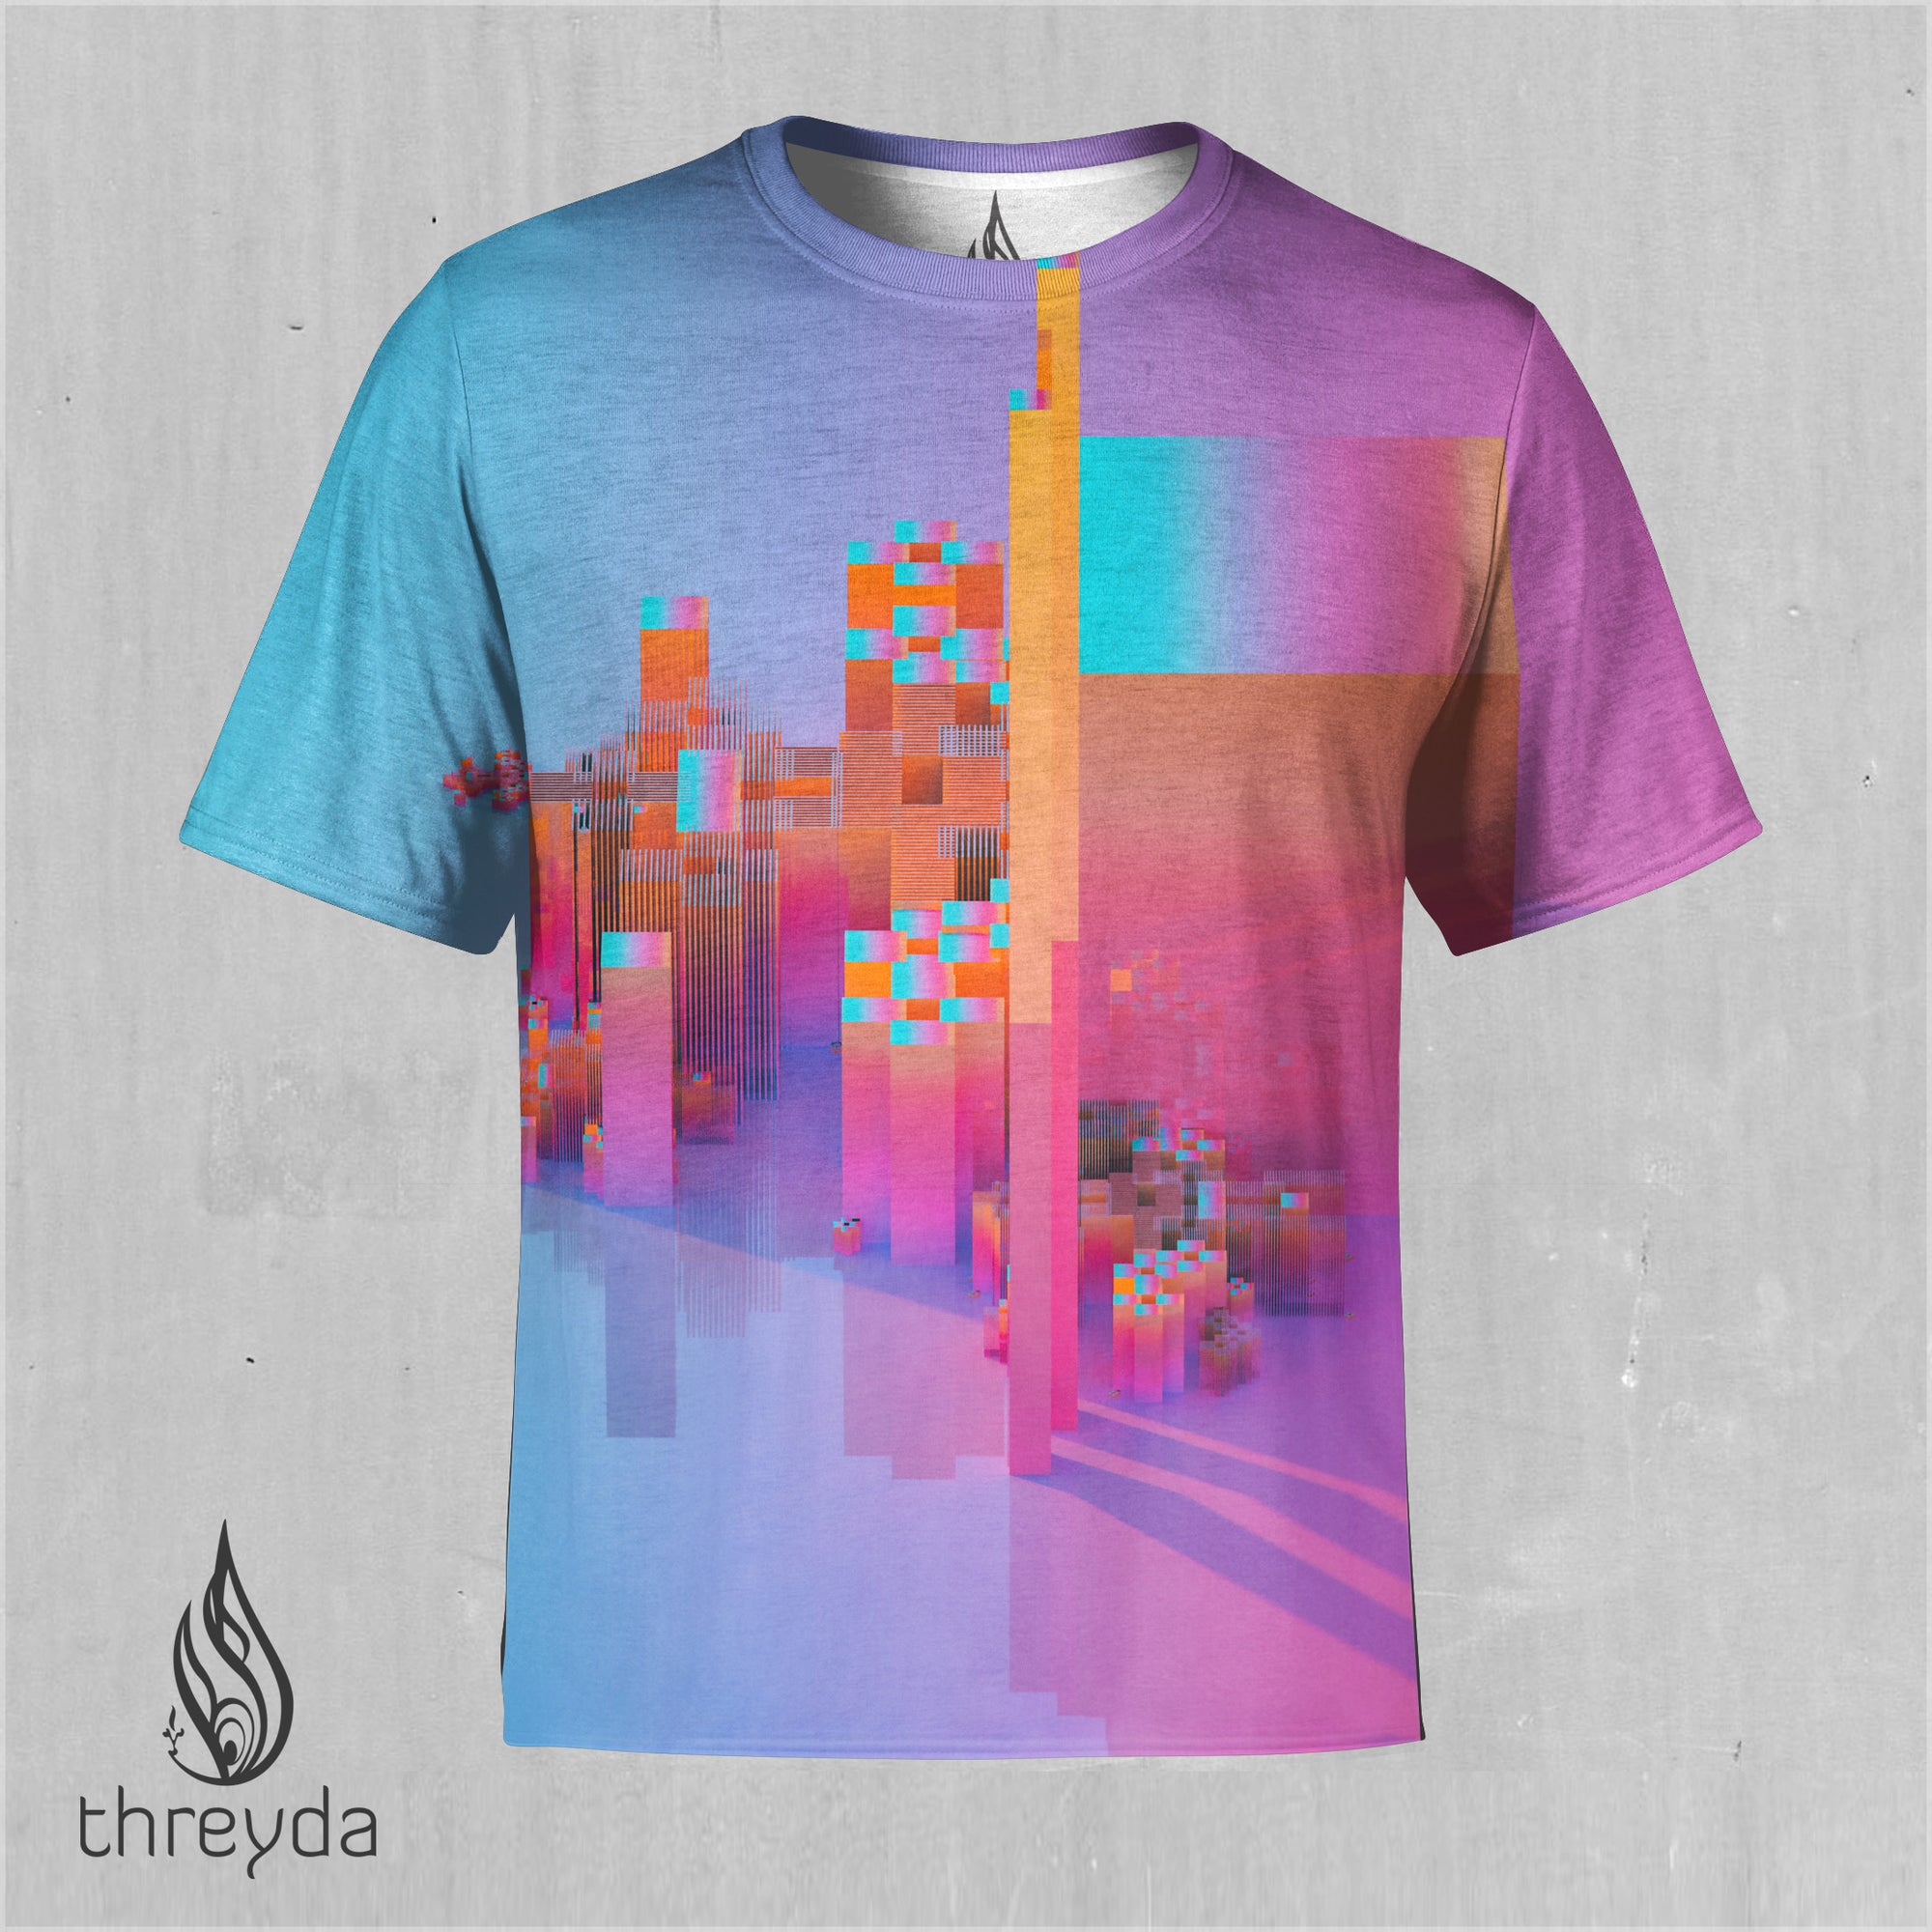 Chromatic Shift Sublimation Tee by Beeple